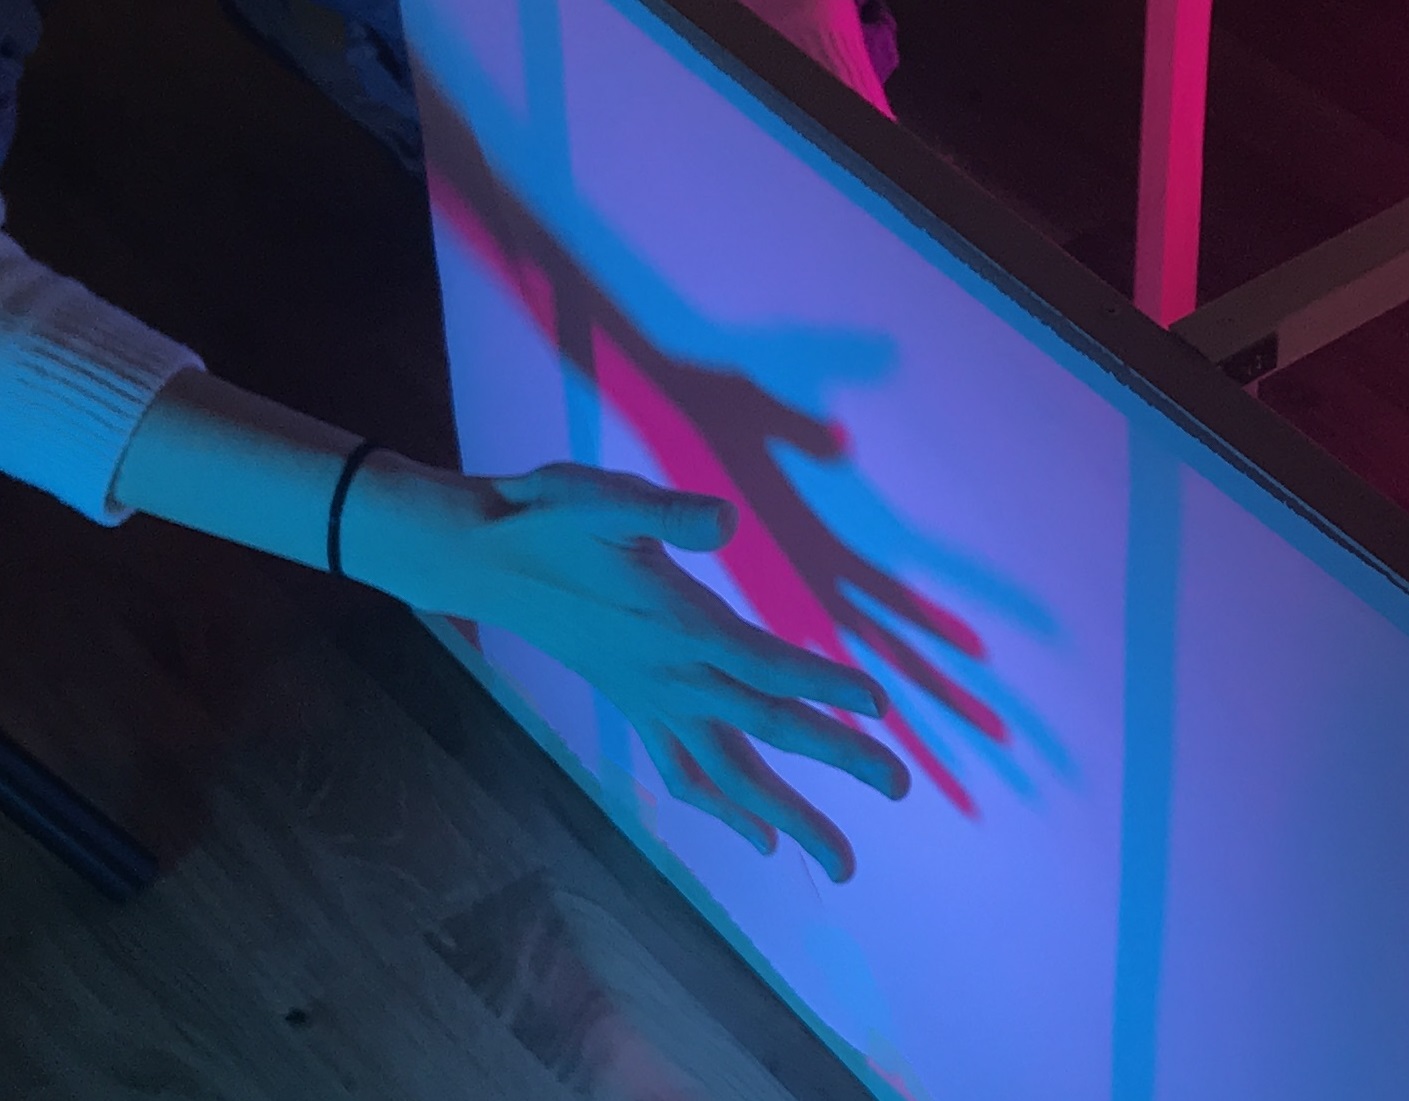 A two-way wall that detects the intersection of two people's shadows to trigger music.